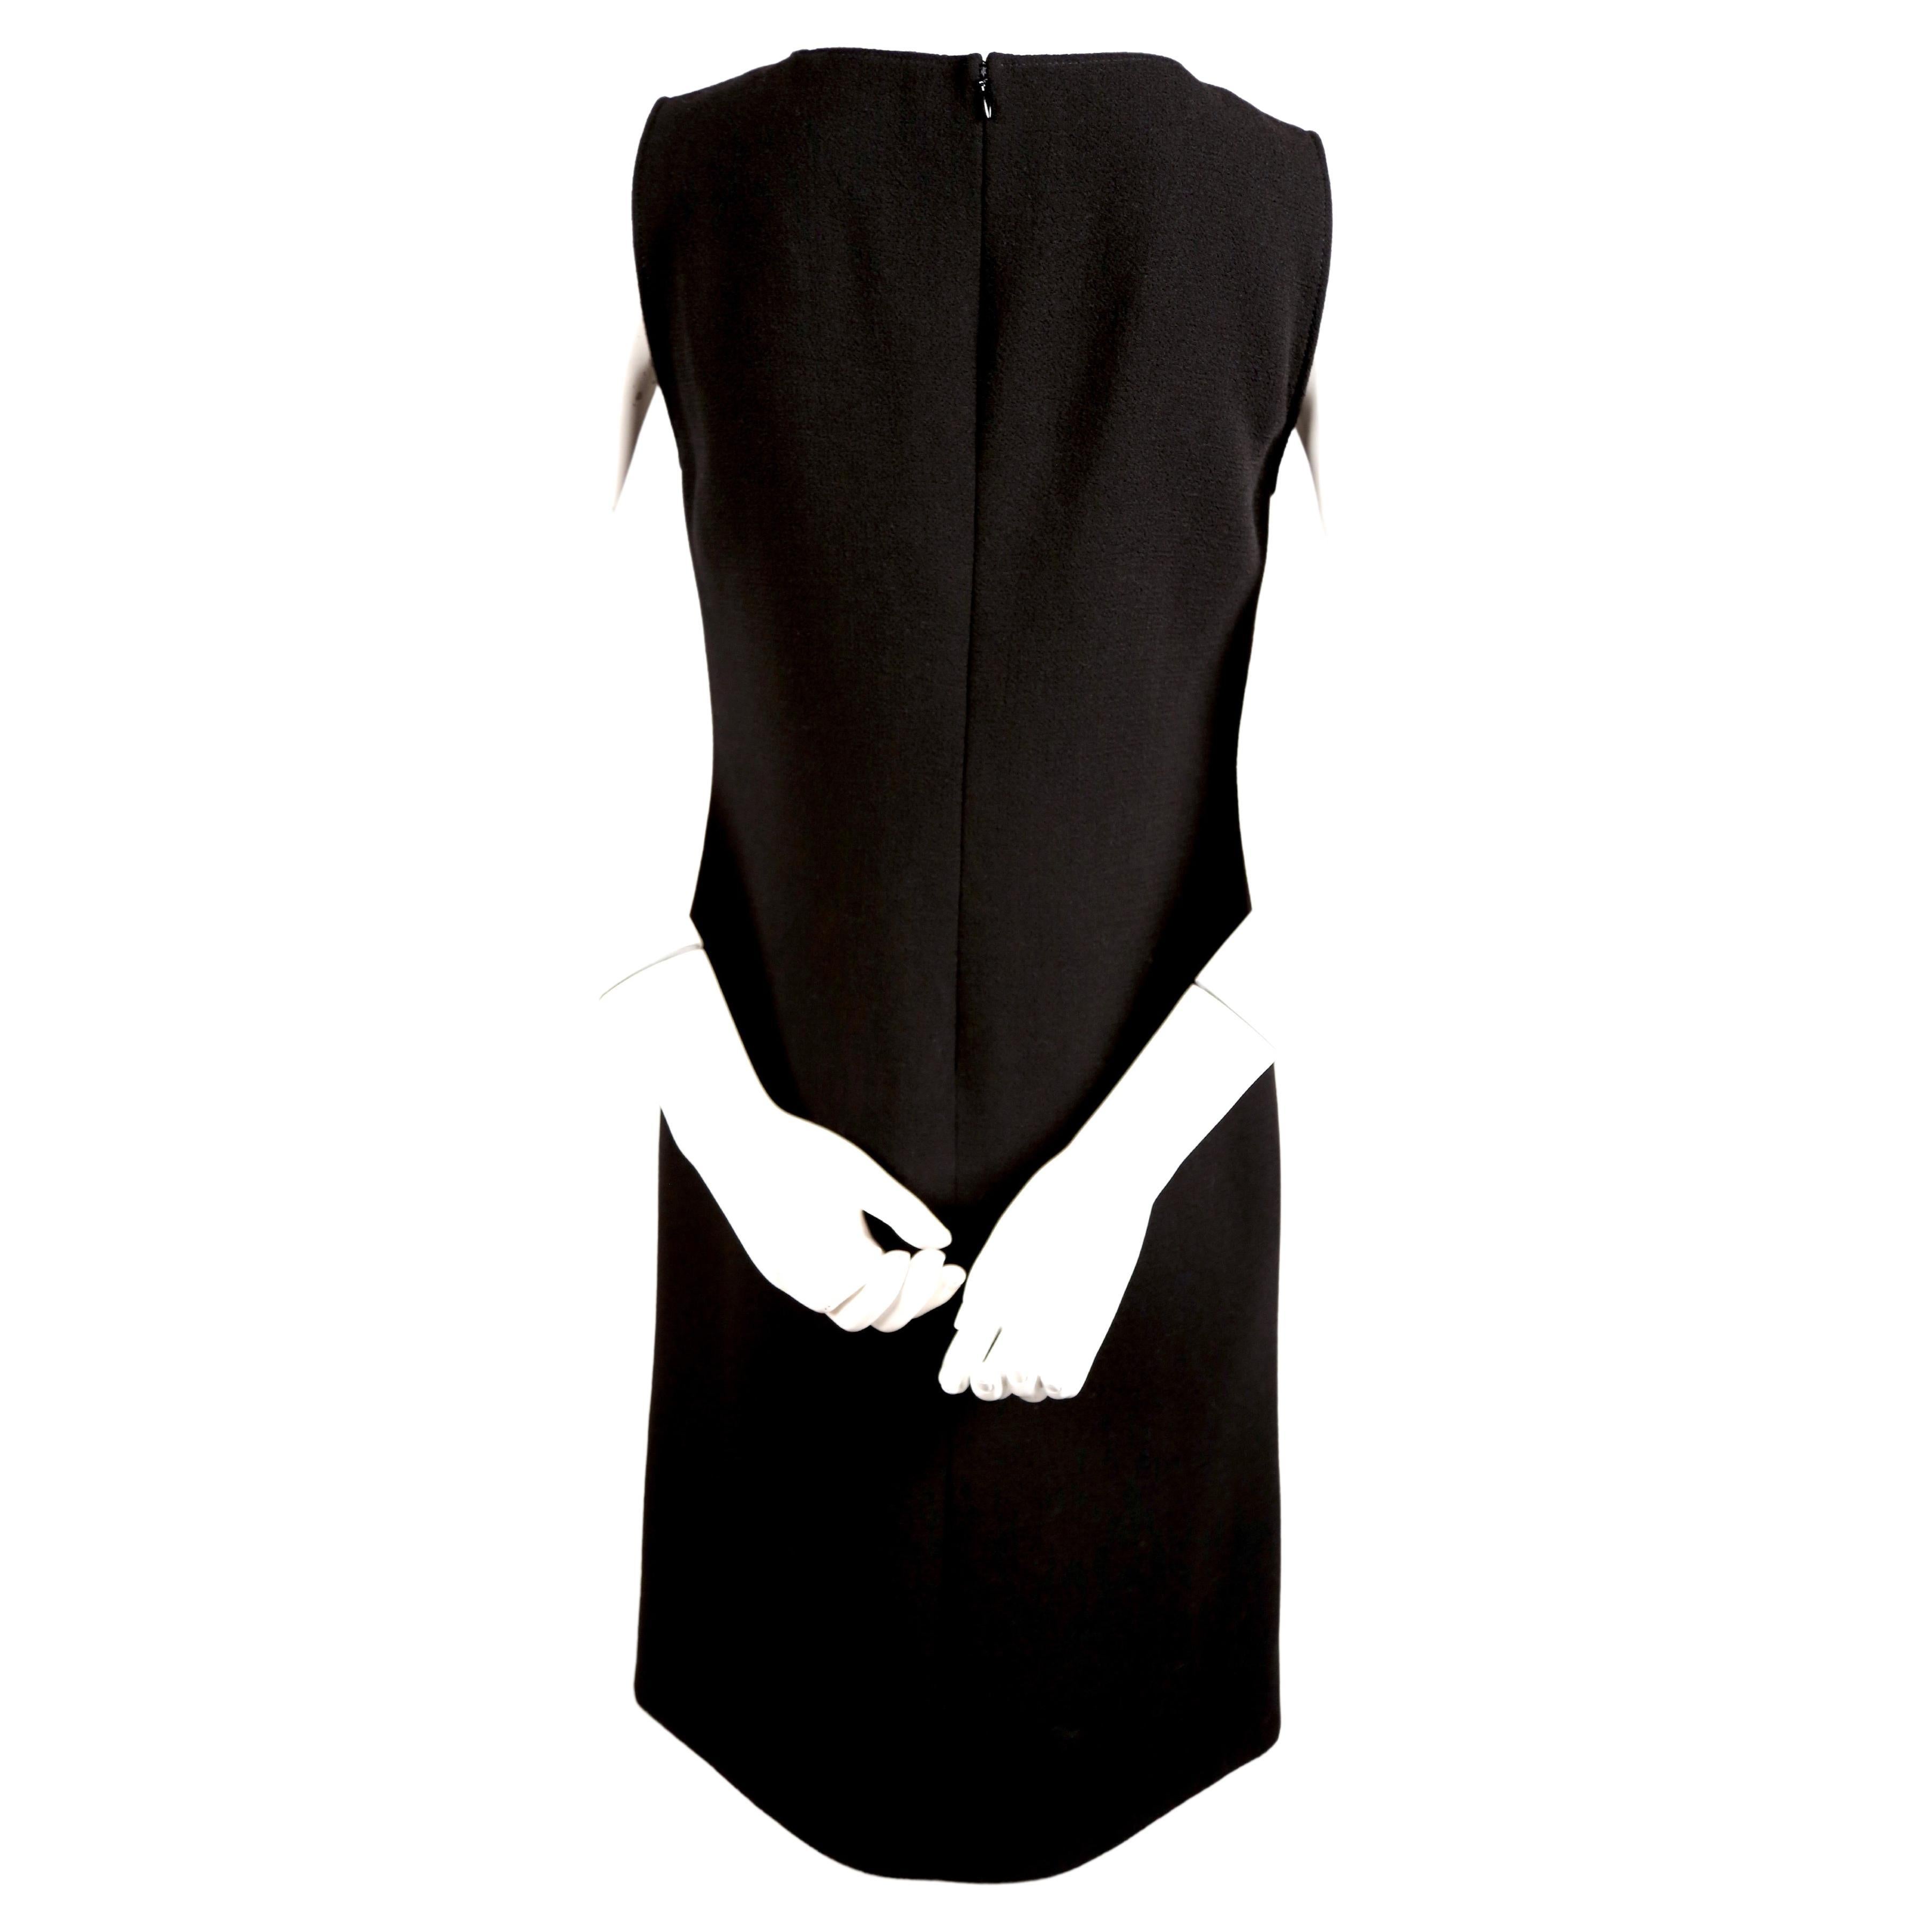 Women's or Men's 1960's PIERRE CARDIN haute couture wool shift dress with circular cut-outs